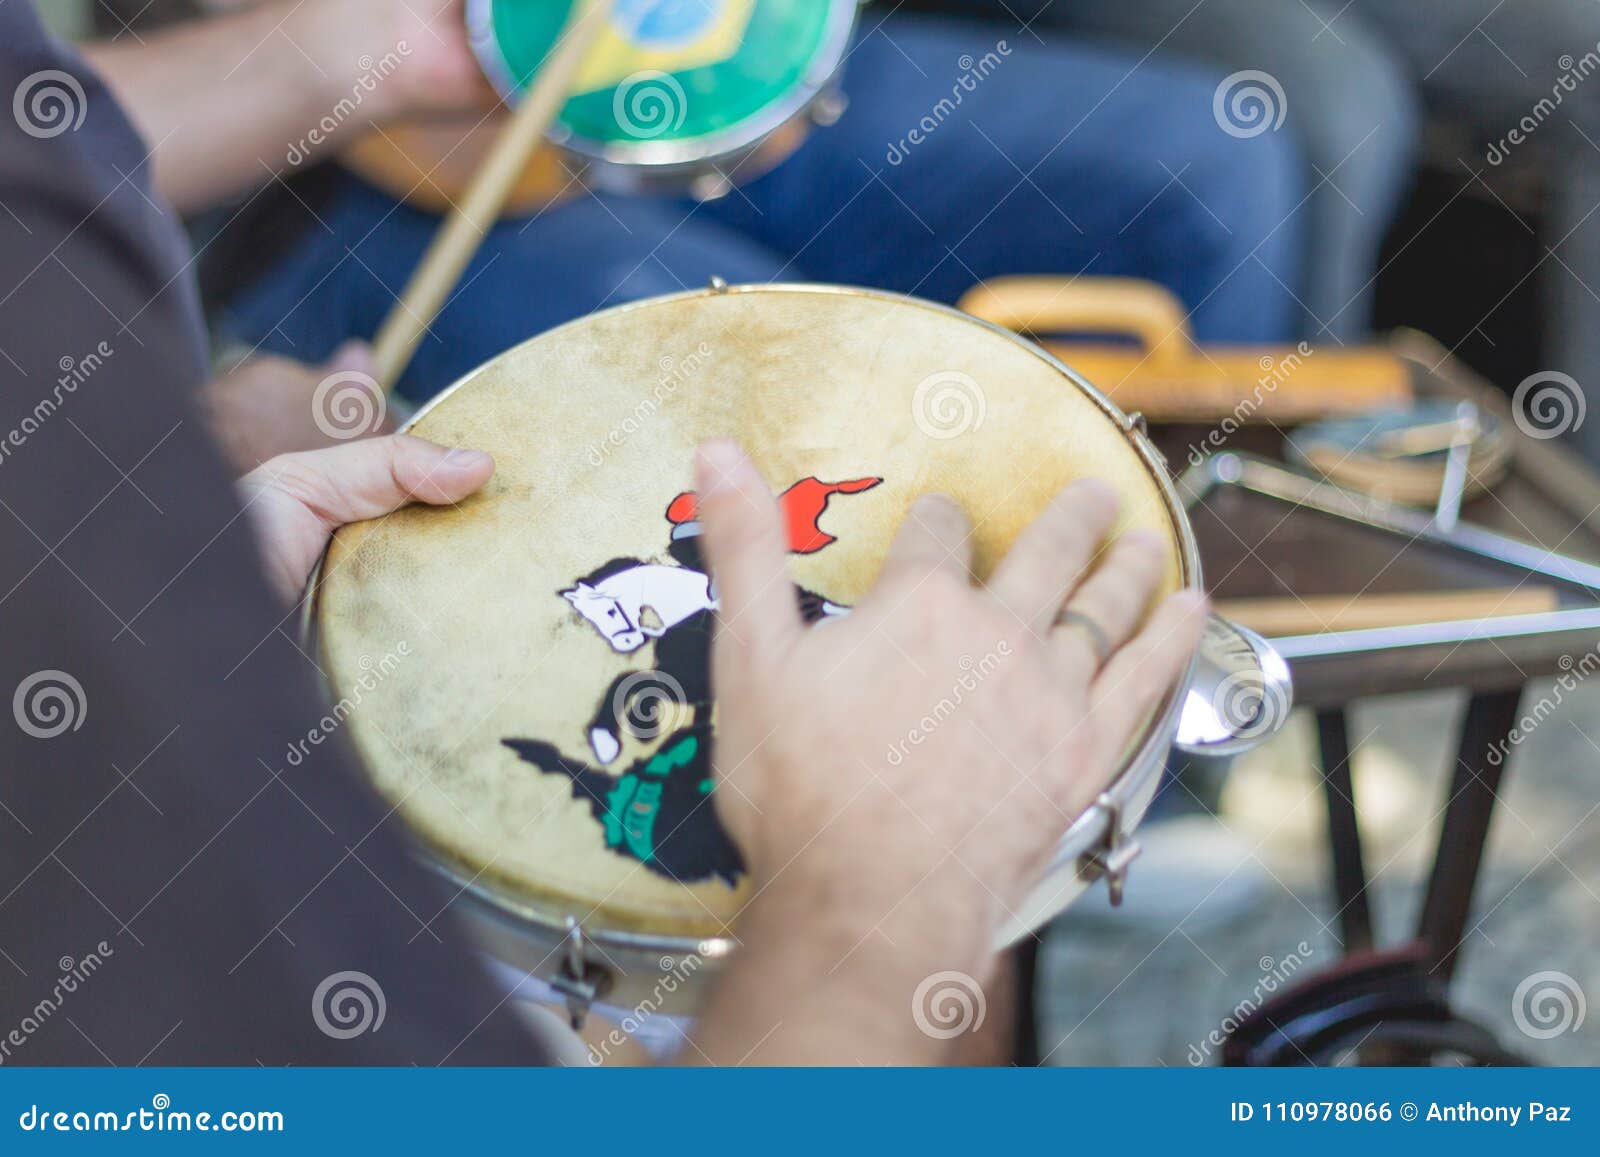 samba is part of carioca culture and one of the most traditional